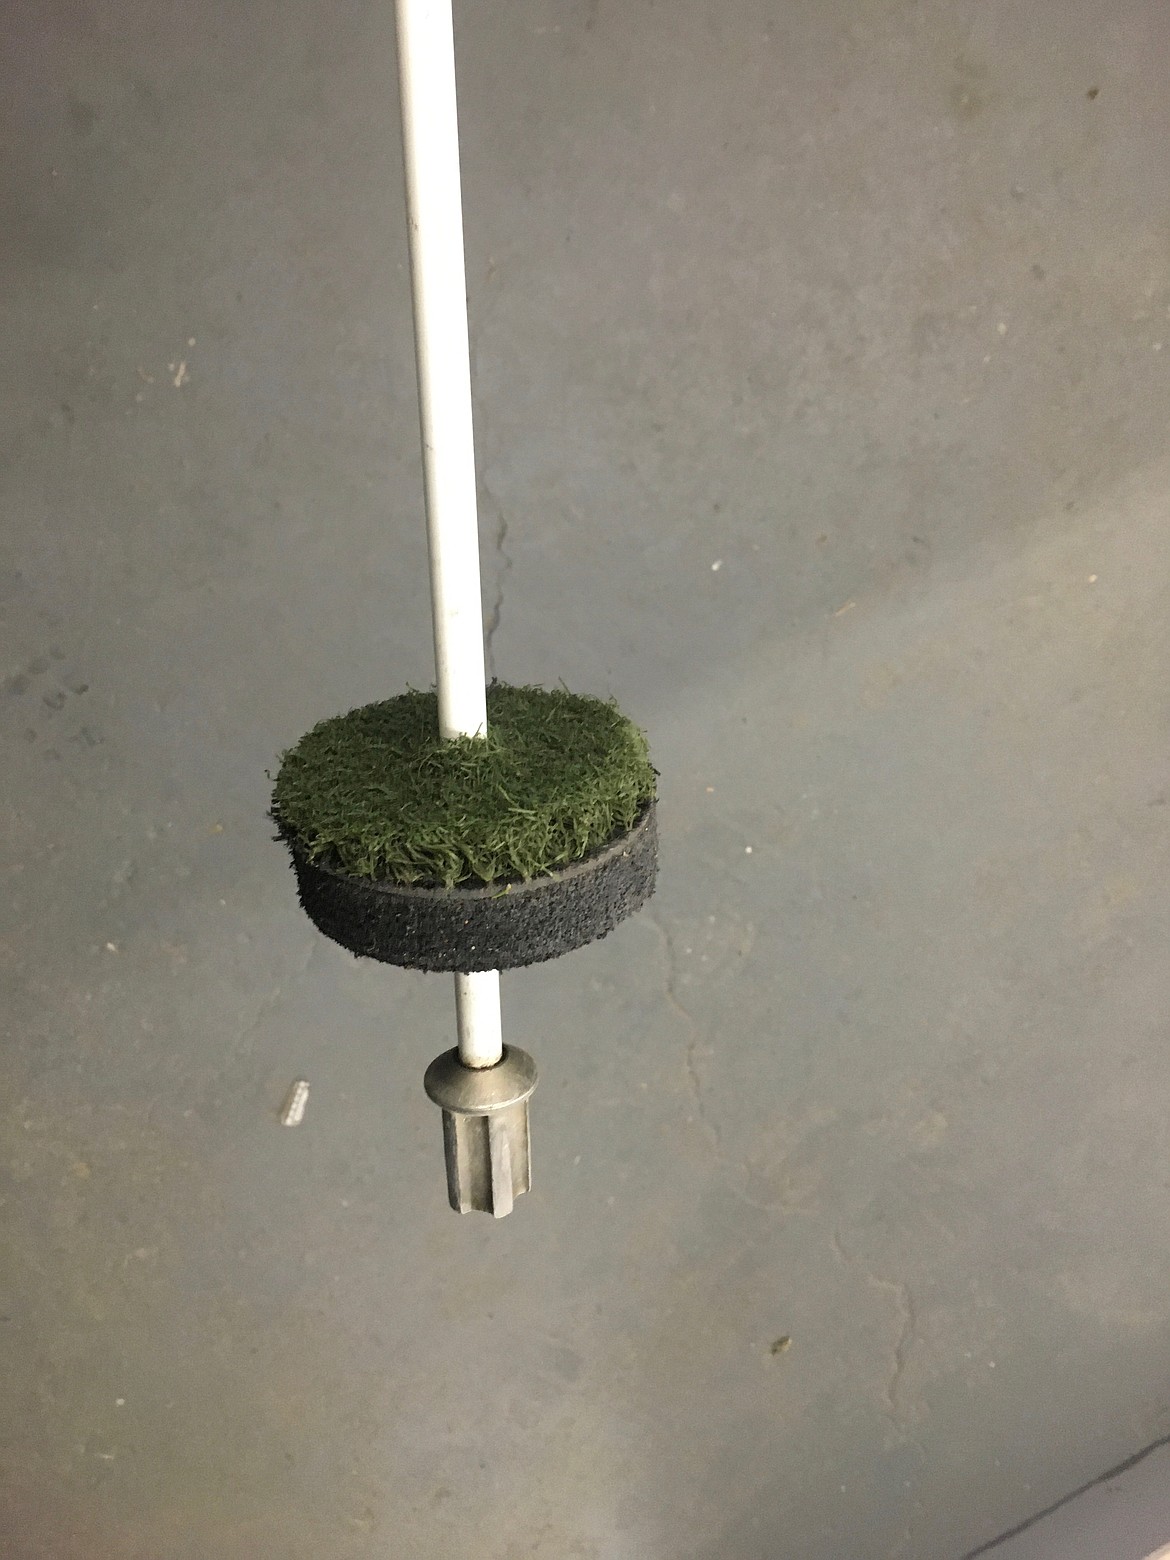 Another look at the cut-up piece of an old driving range mat, placed around the flagstick to keep the ball from falling to the bottom of the cup.